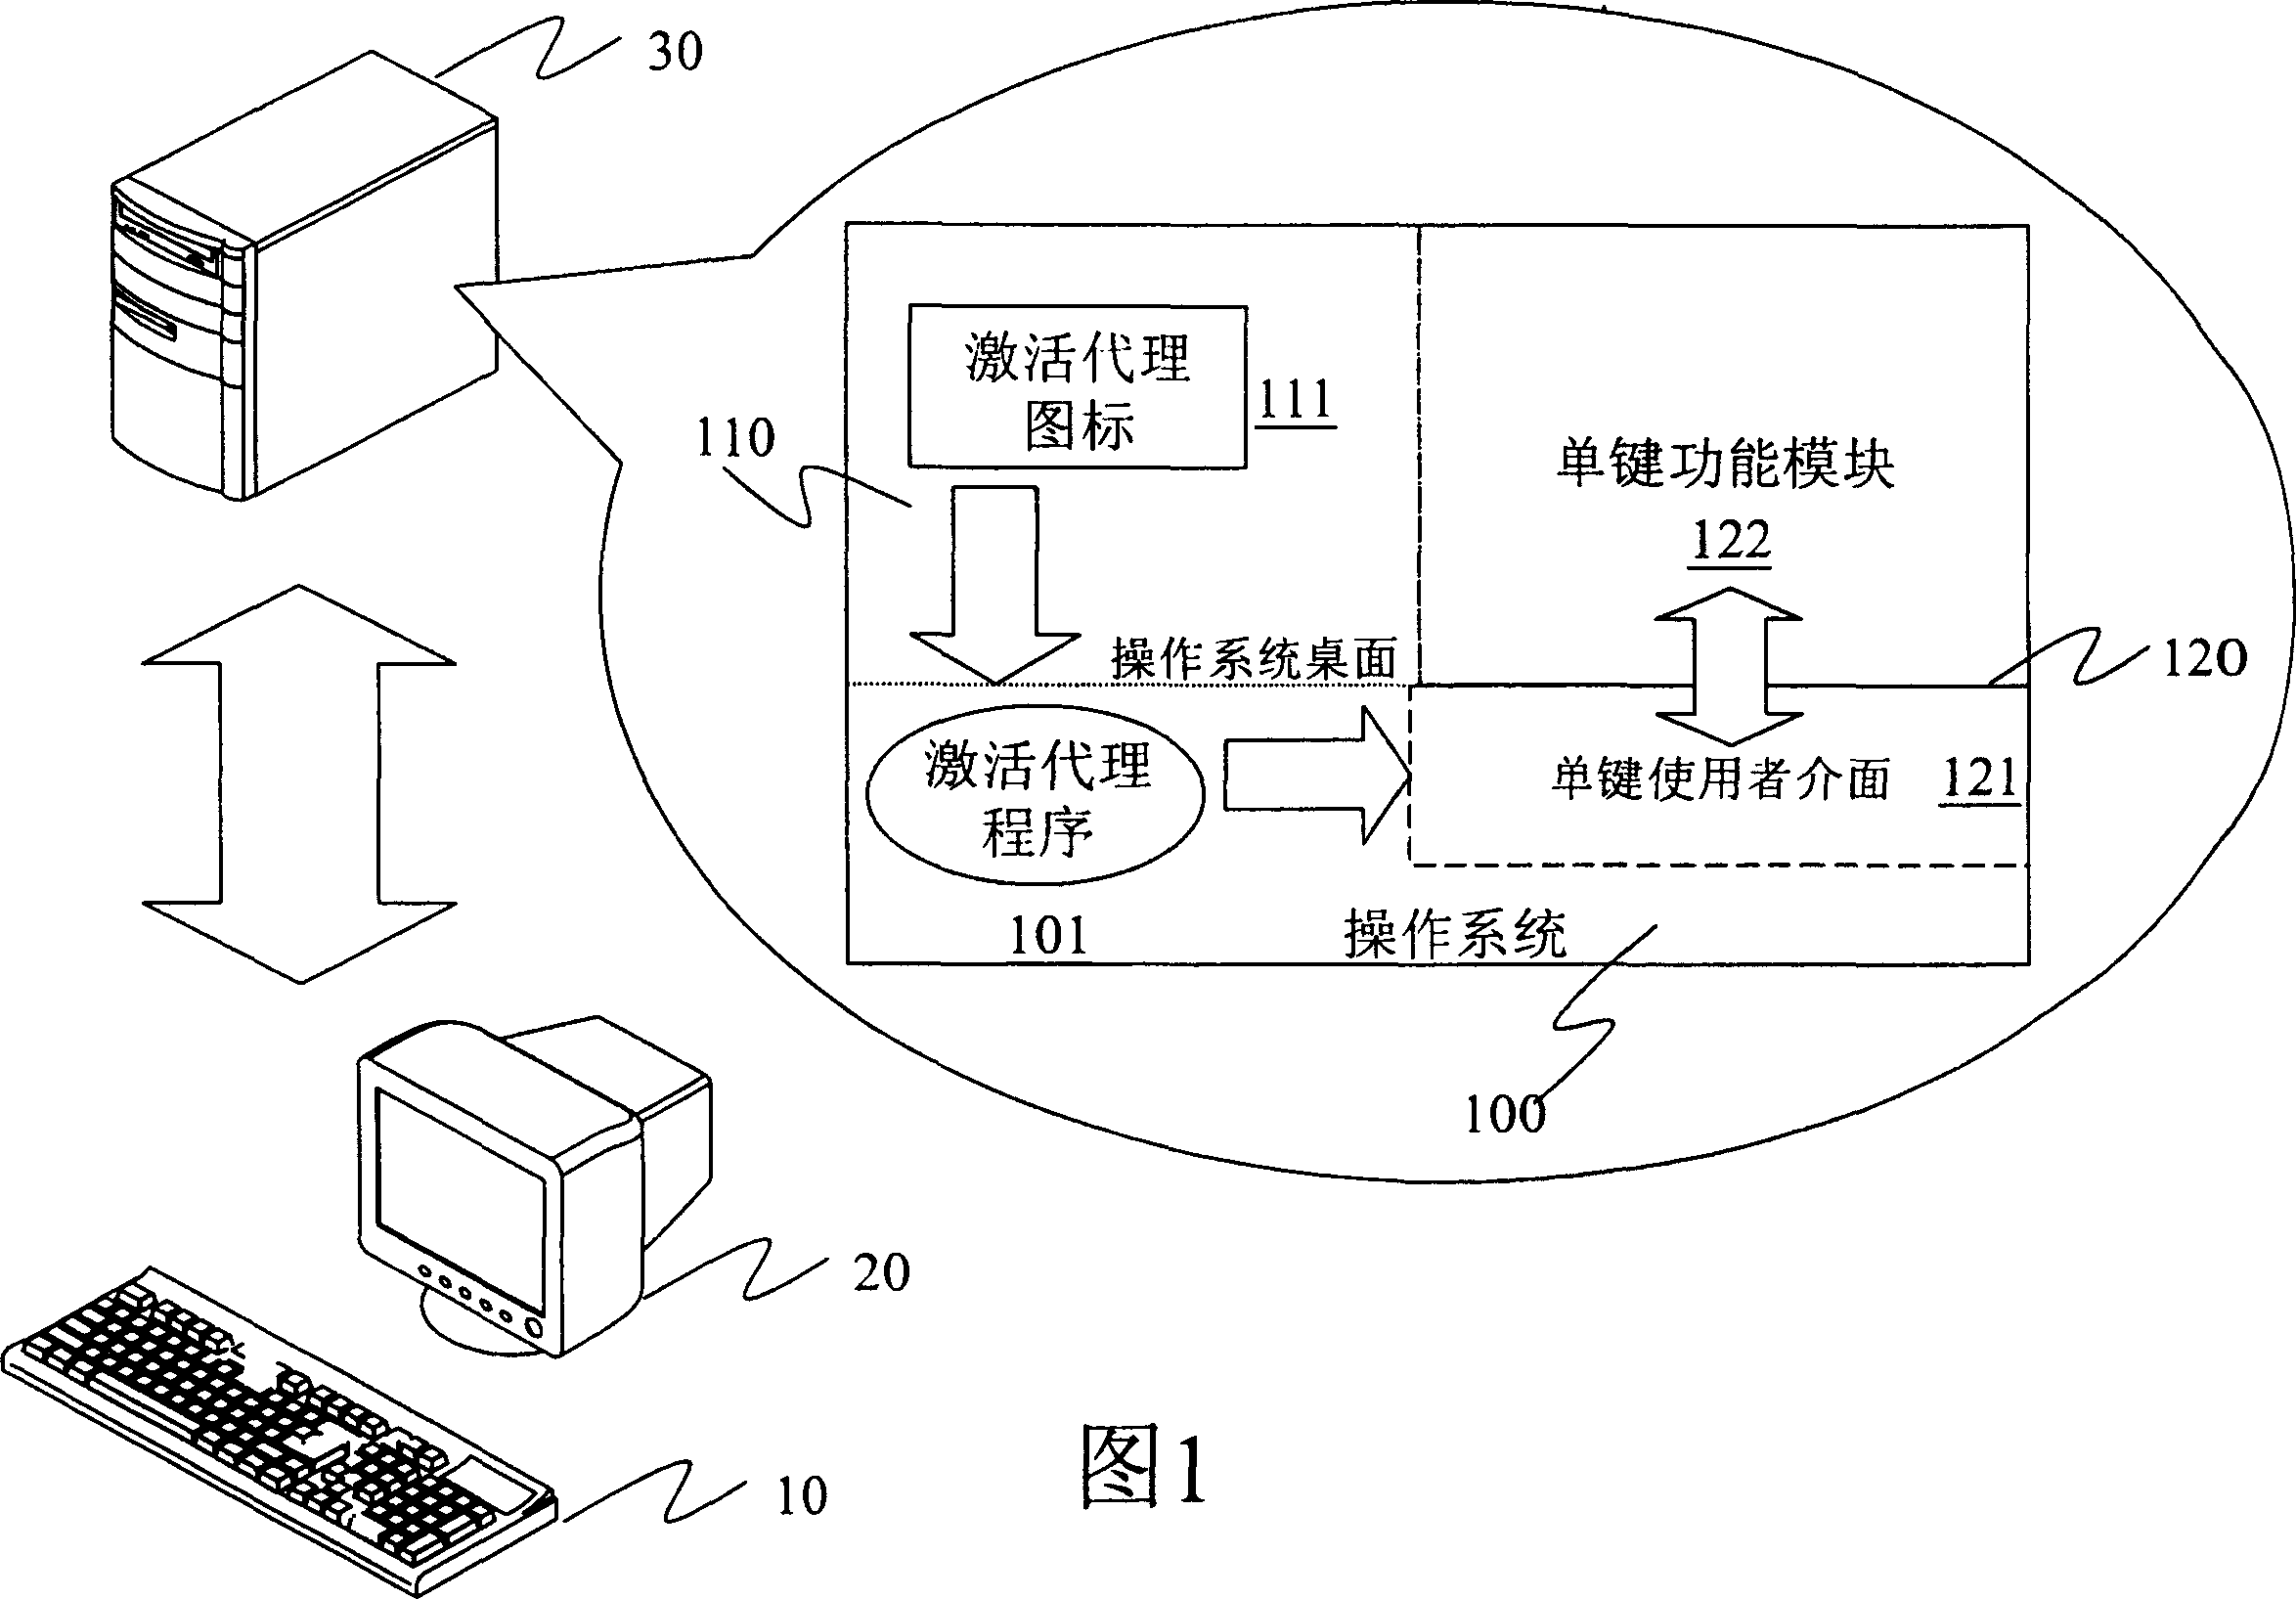 Method for hot key activation of single key system